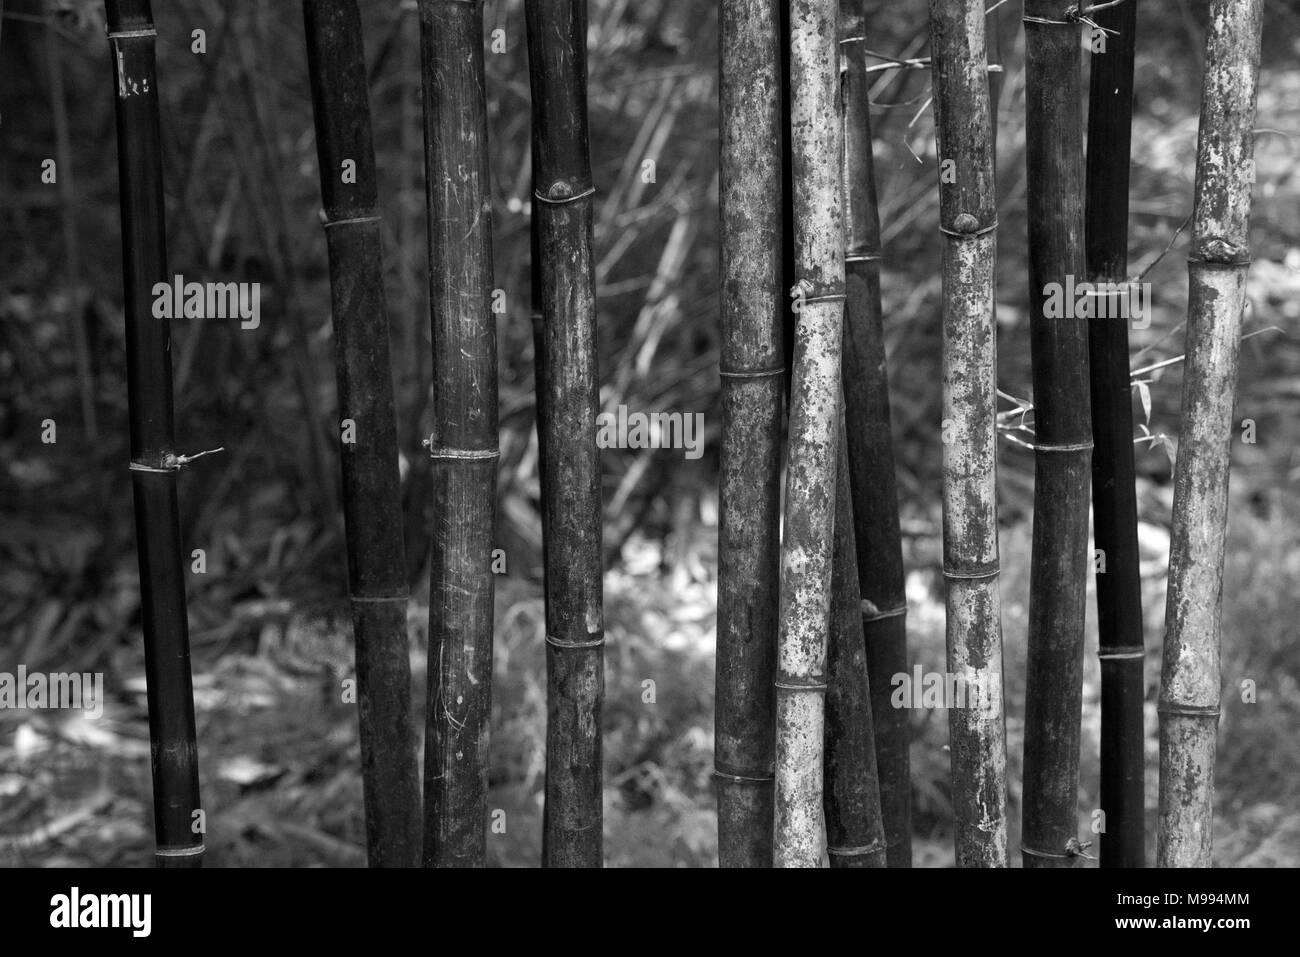 Bamboo Banque D'Images